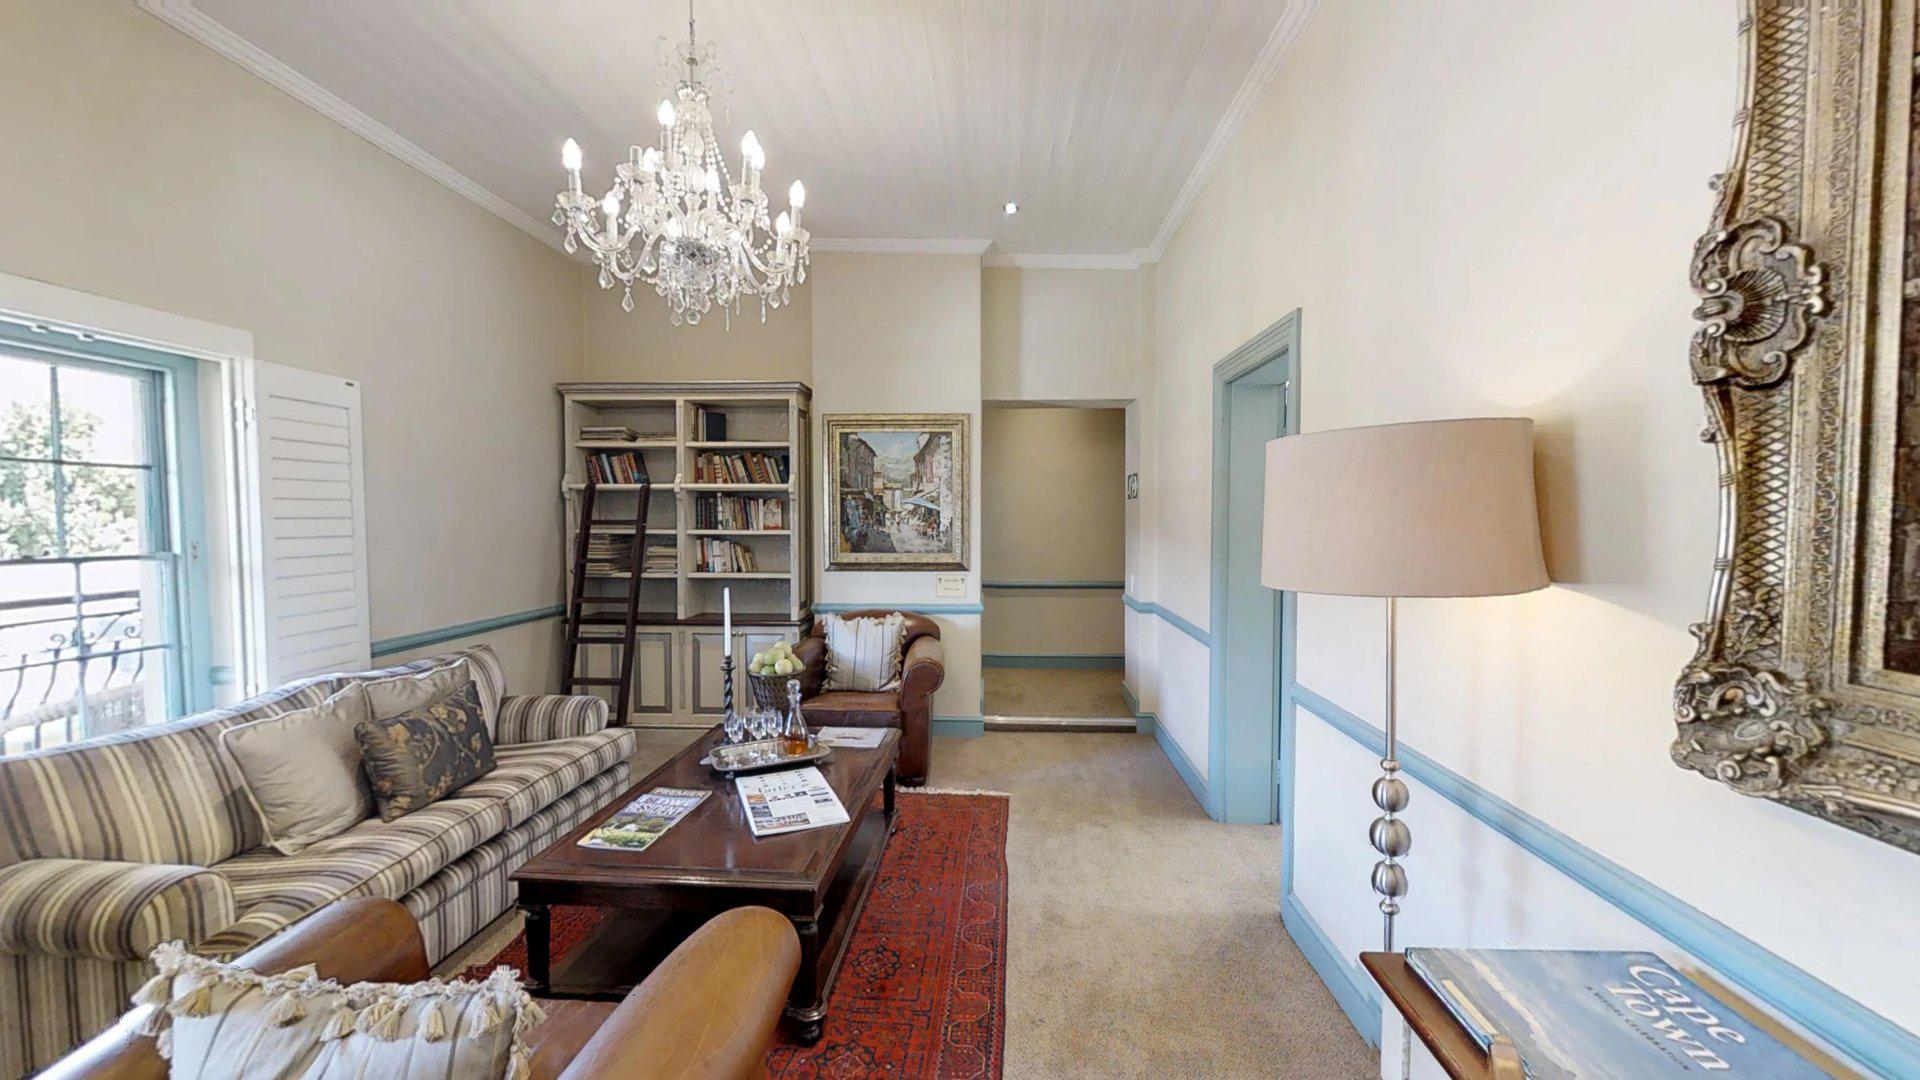 Guests Rooms - Standard Rooms at Franschhoek Country House Boutique Hotel